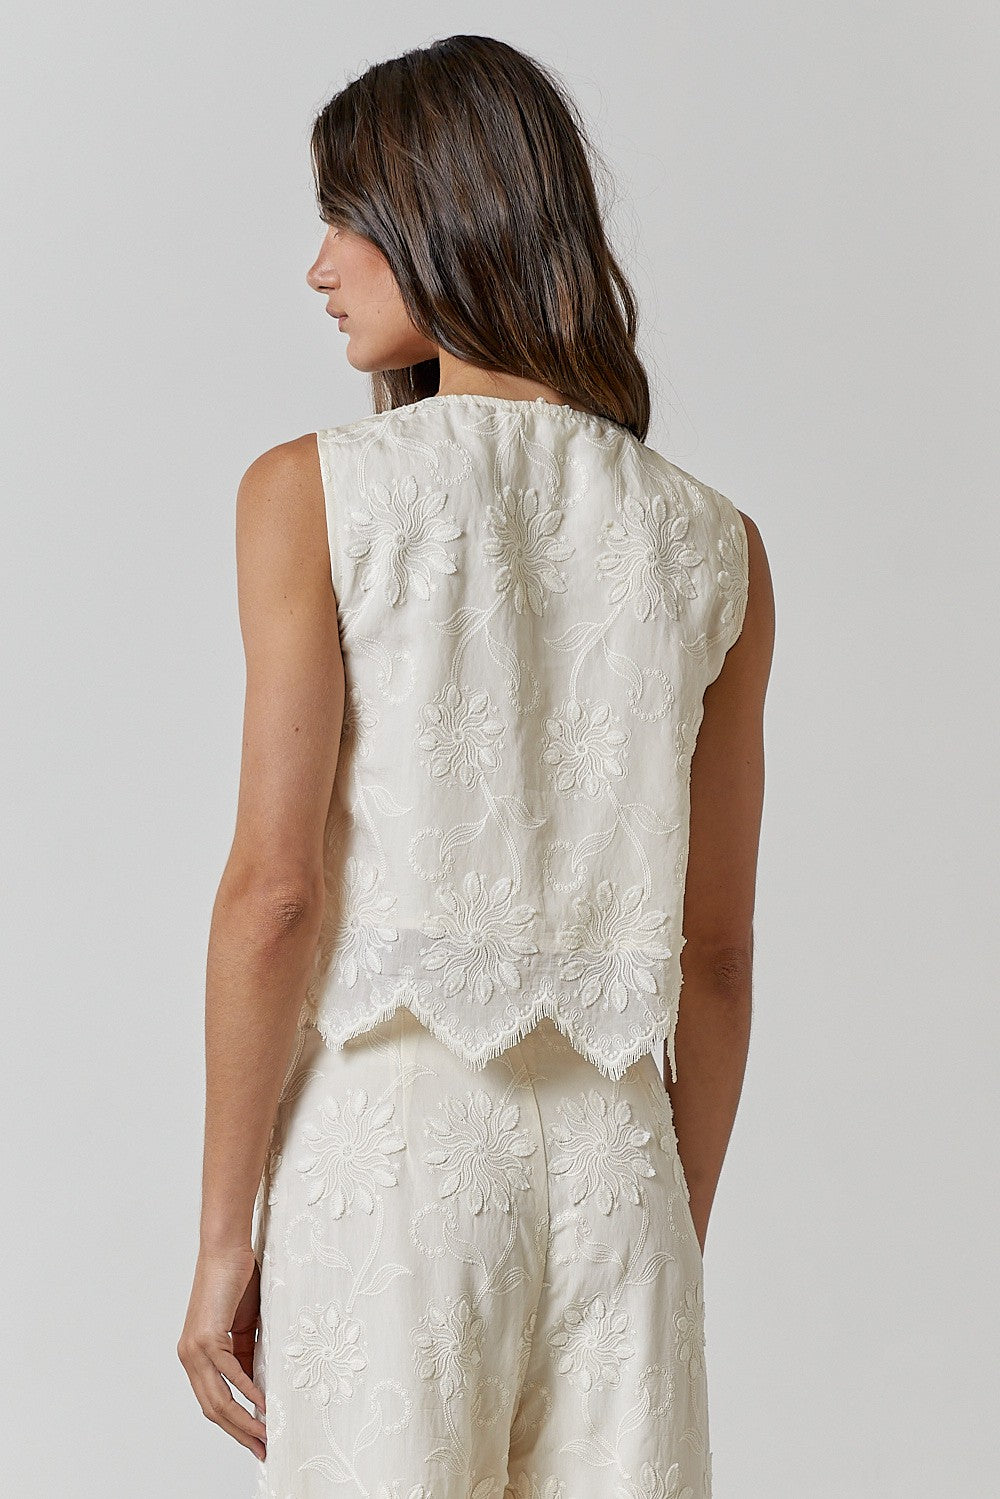 FLORAL EMBROIDERY SLEEVELESS TOP